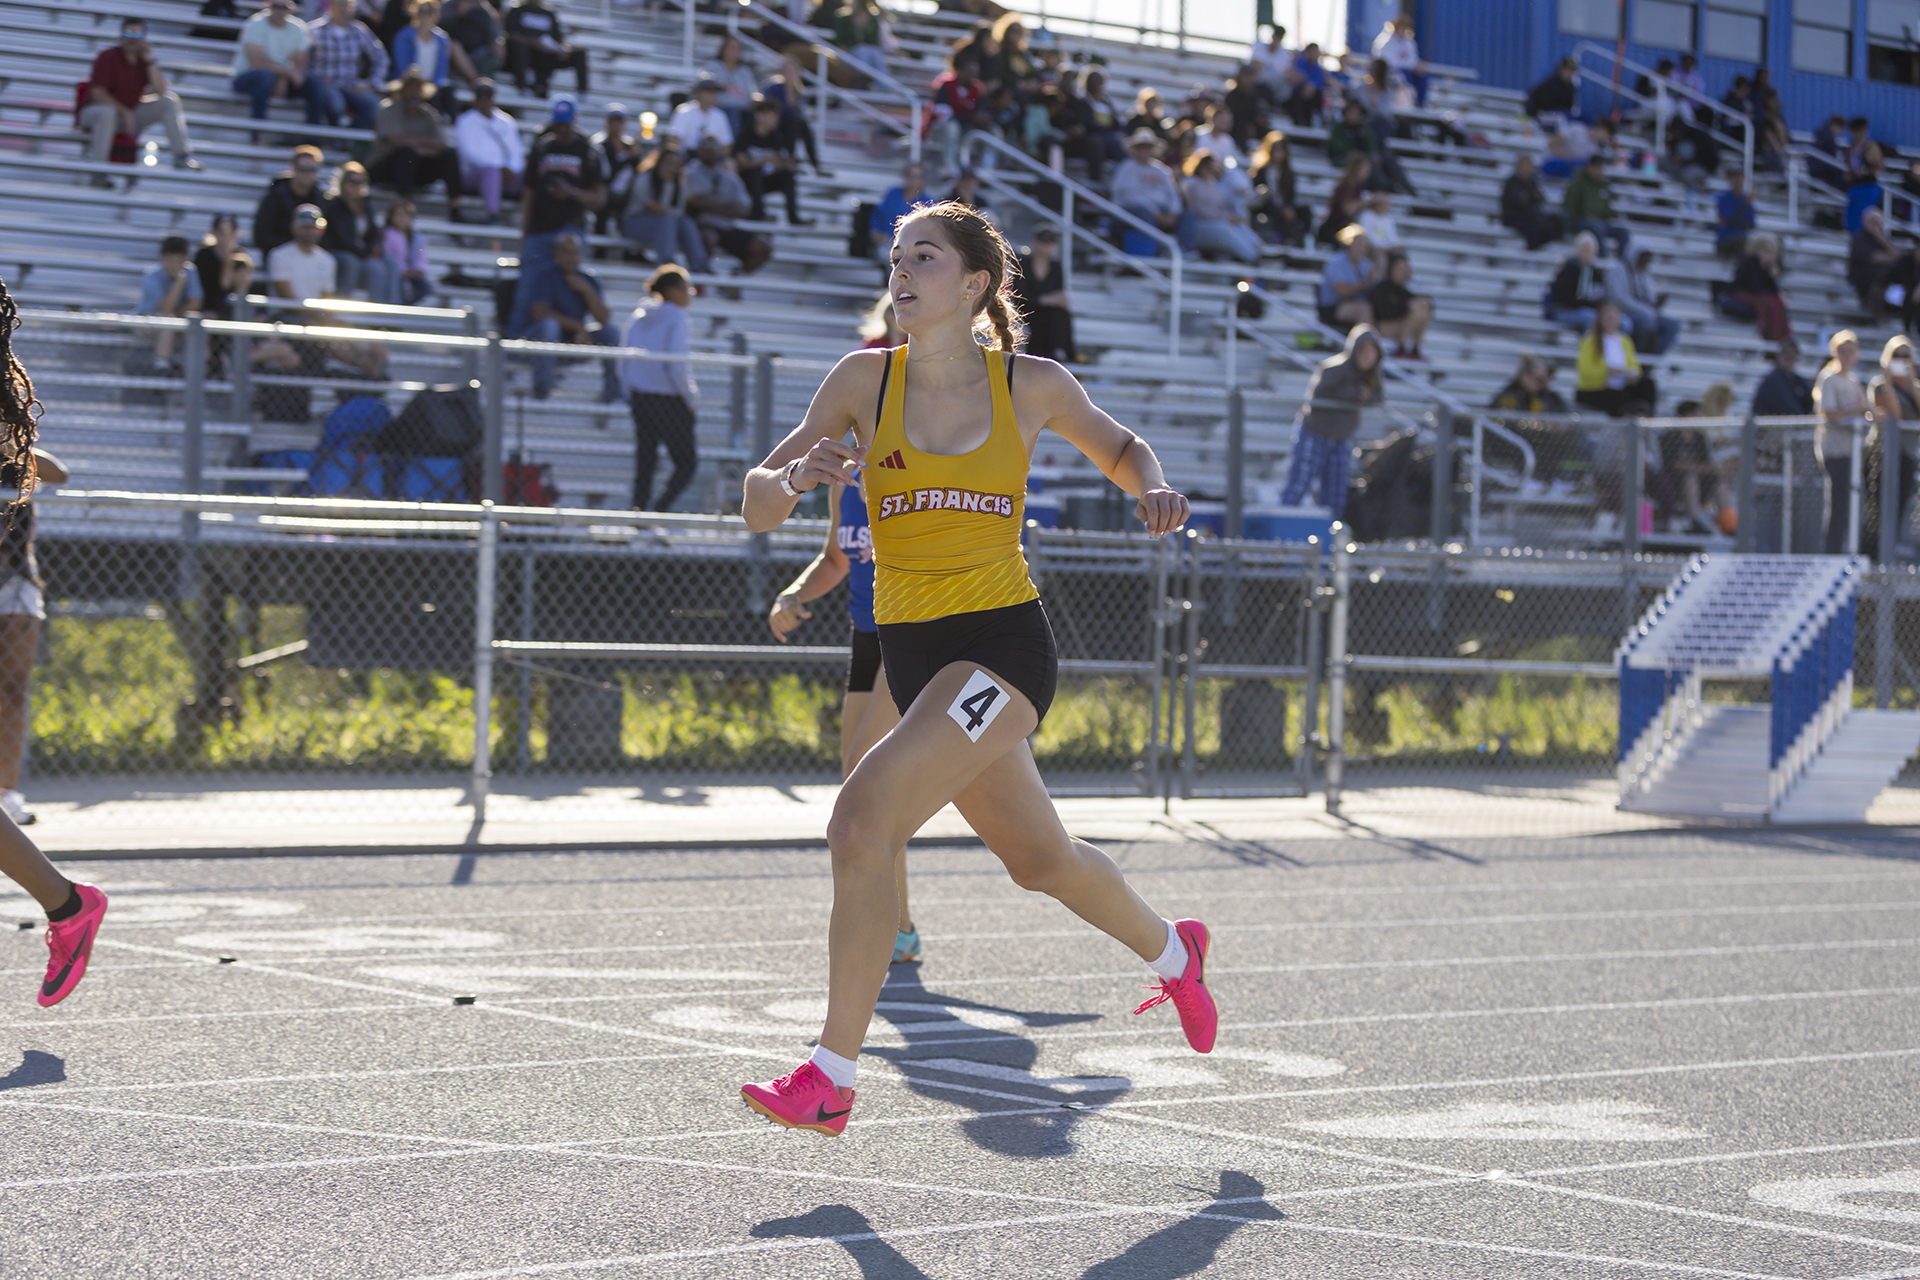 Towne, Randall lead SF on first day of section divisional